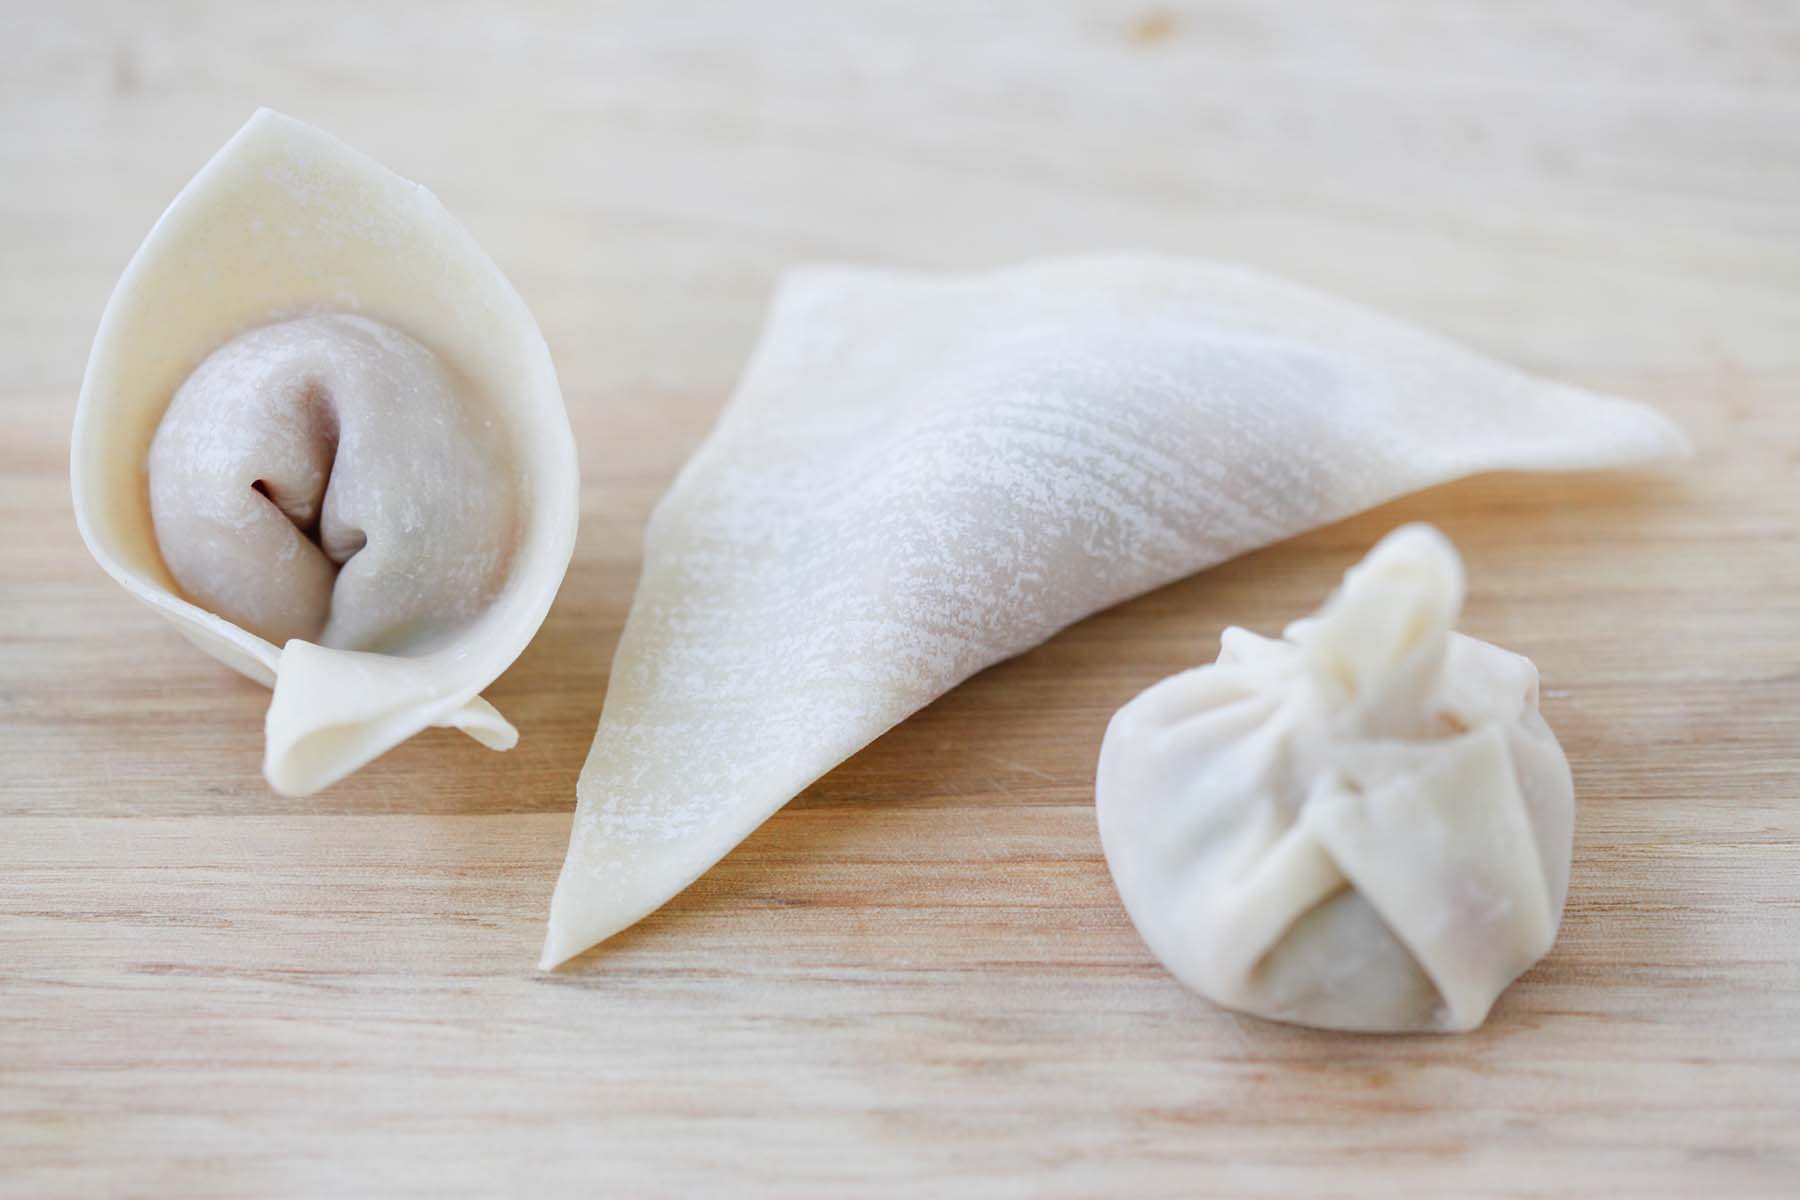 Three wonton folding techniques: cat's ears, triangles, and simple Hong Kong style wrap.